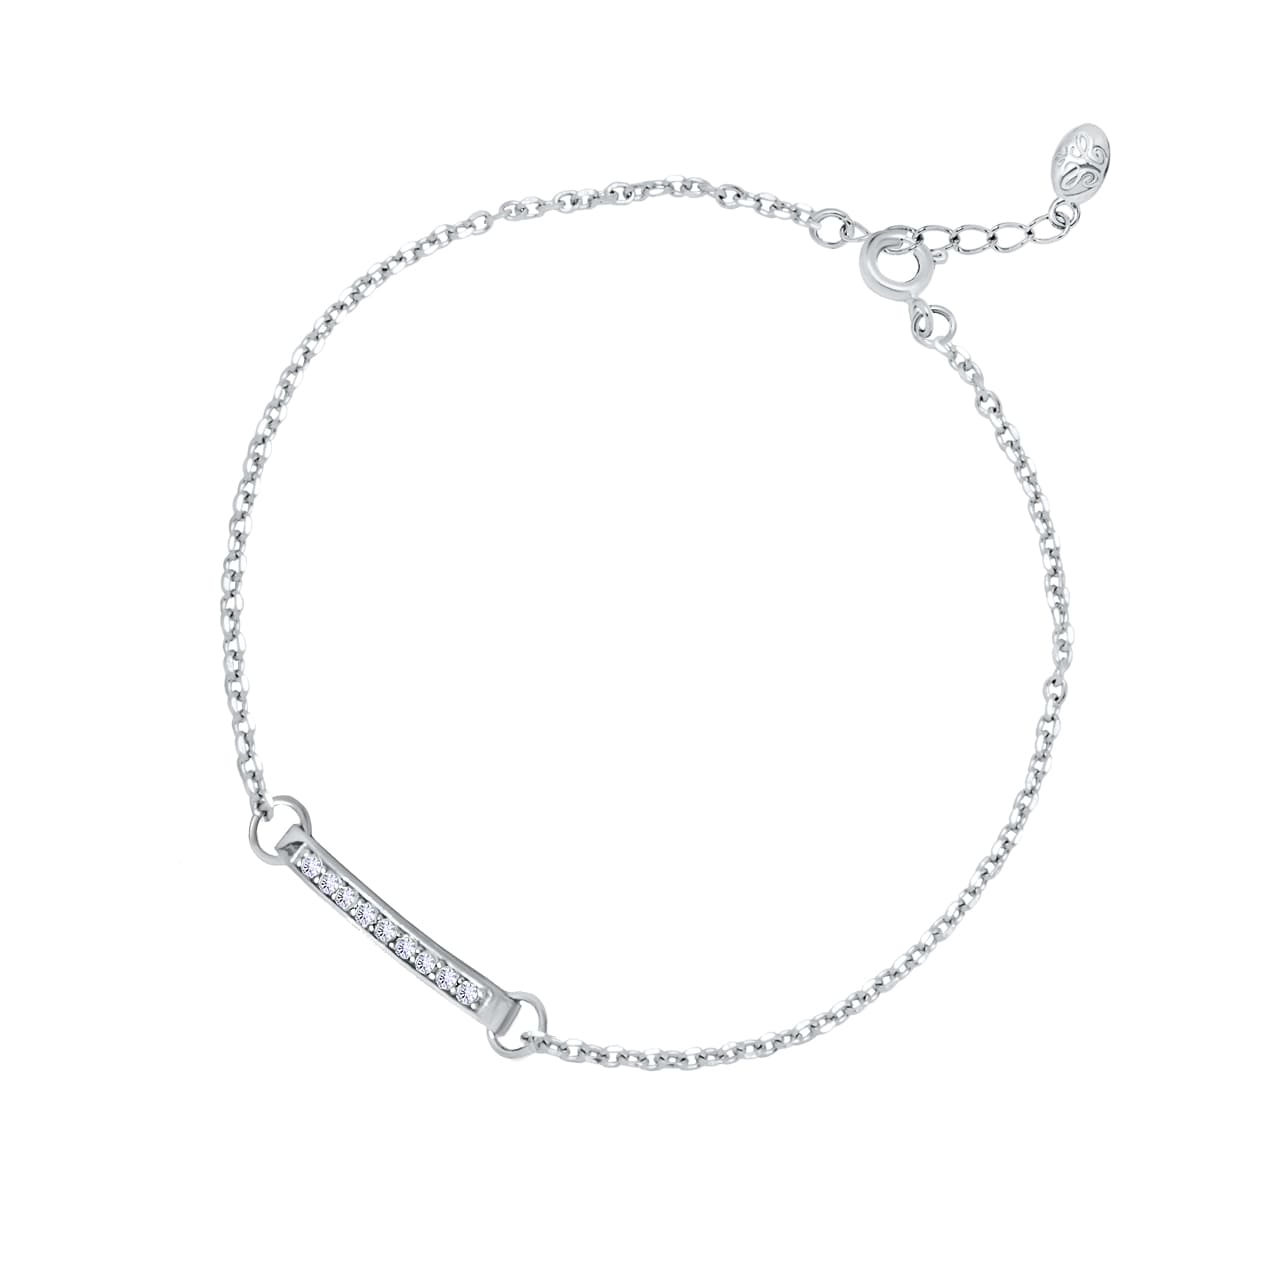 Armband_Lyn_925_Sterling_Silber_11249